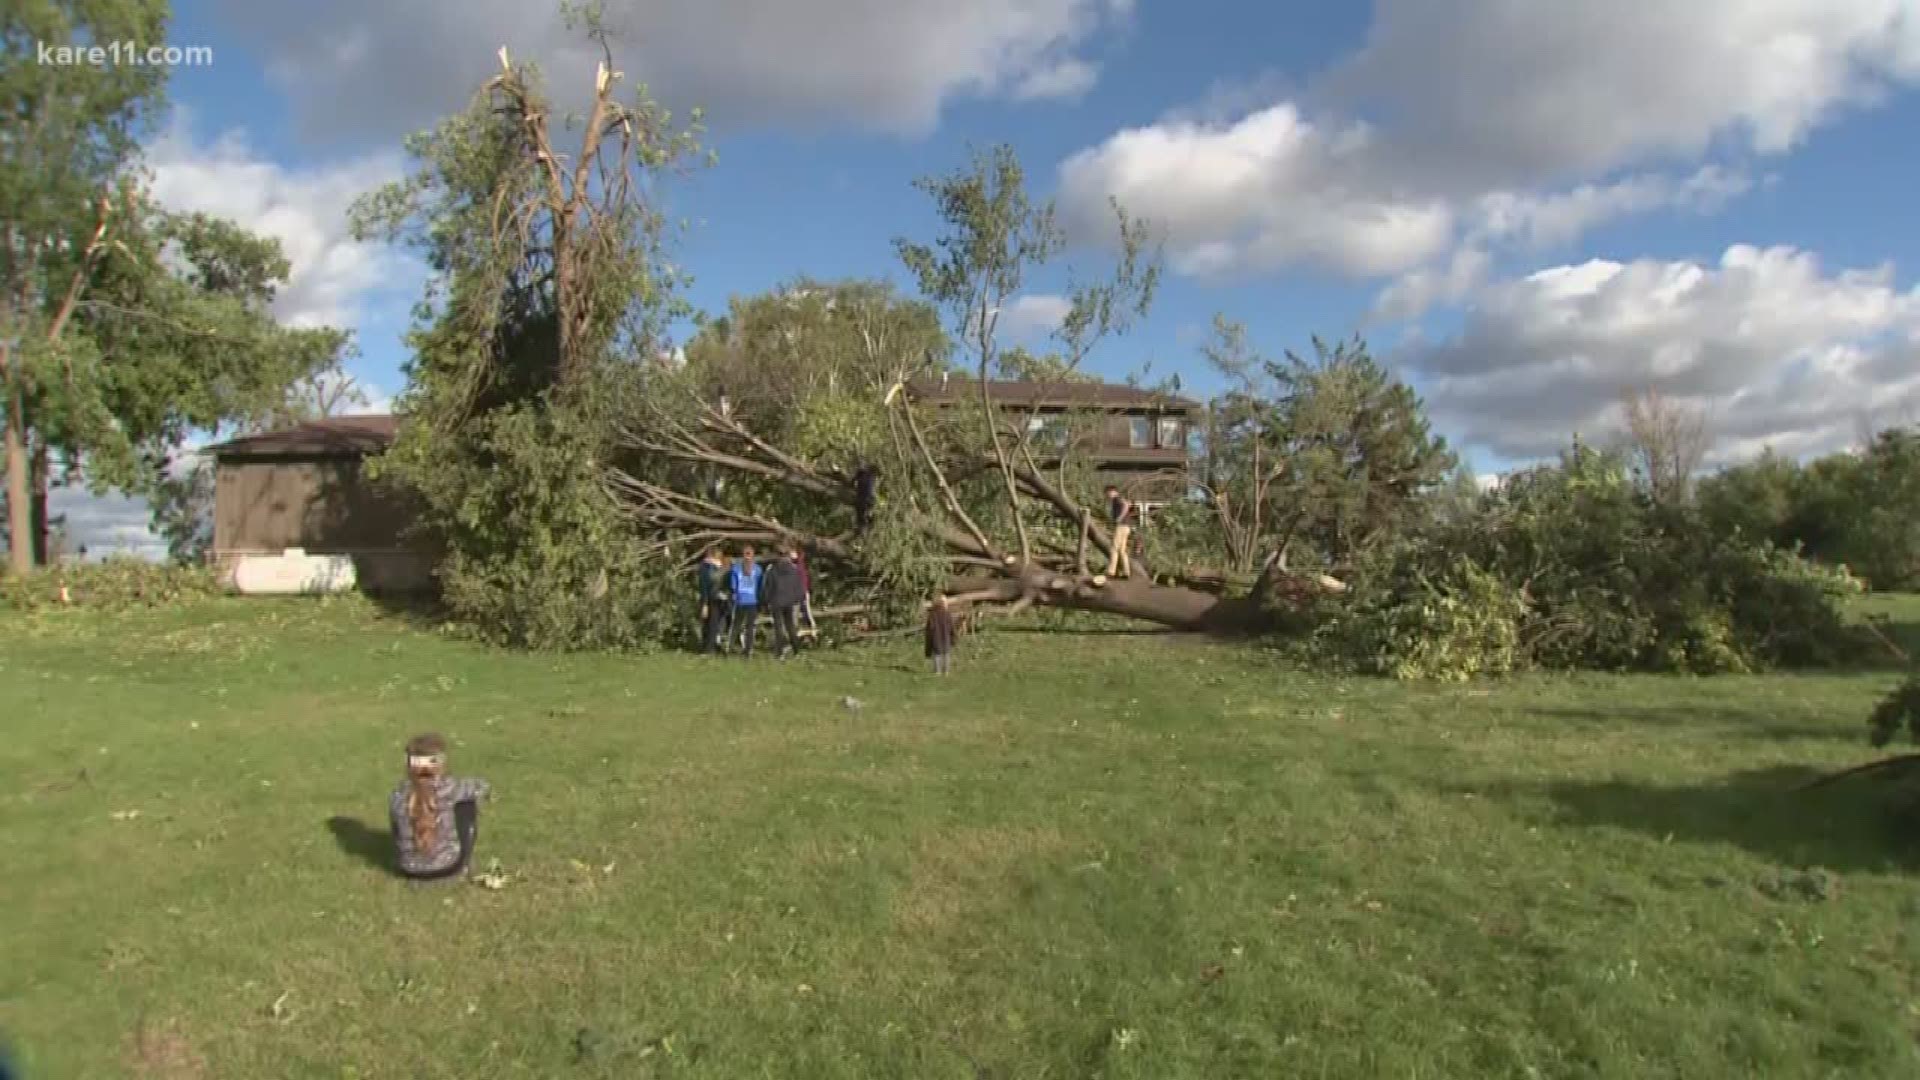 FL family moves to MN to avoid hurricanes, hit by tornado